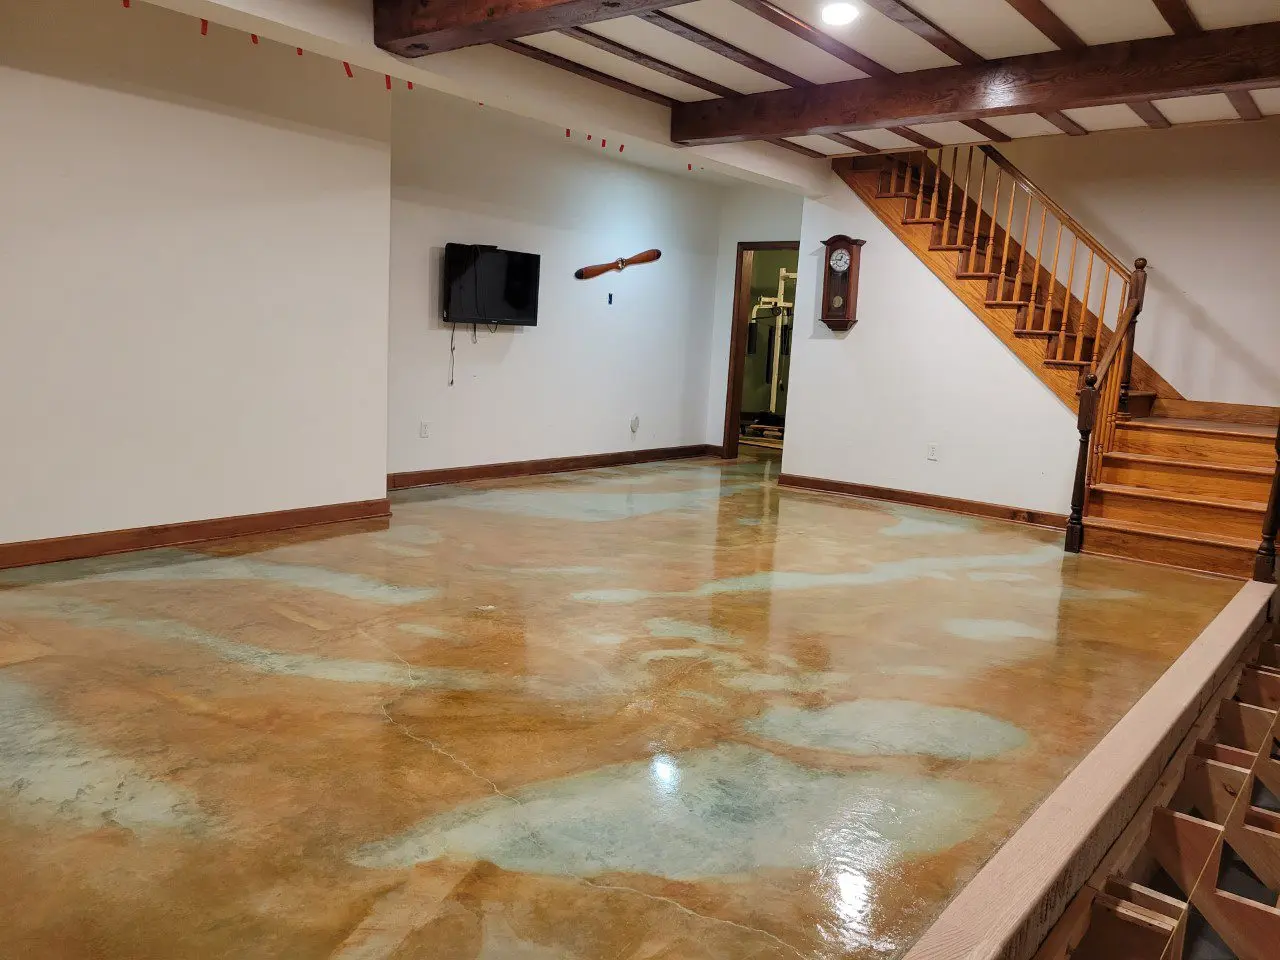 The completed stained, sealed, and waxed concrete basement floor, boasting richly pigmented colors and a beautiful, glossy finish